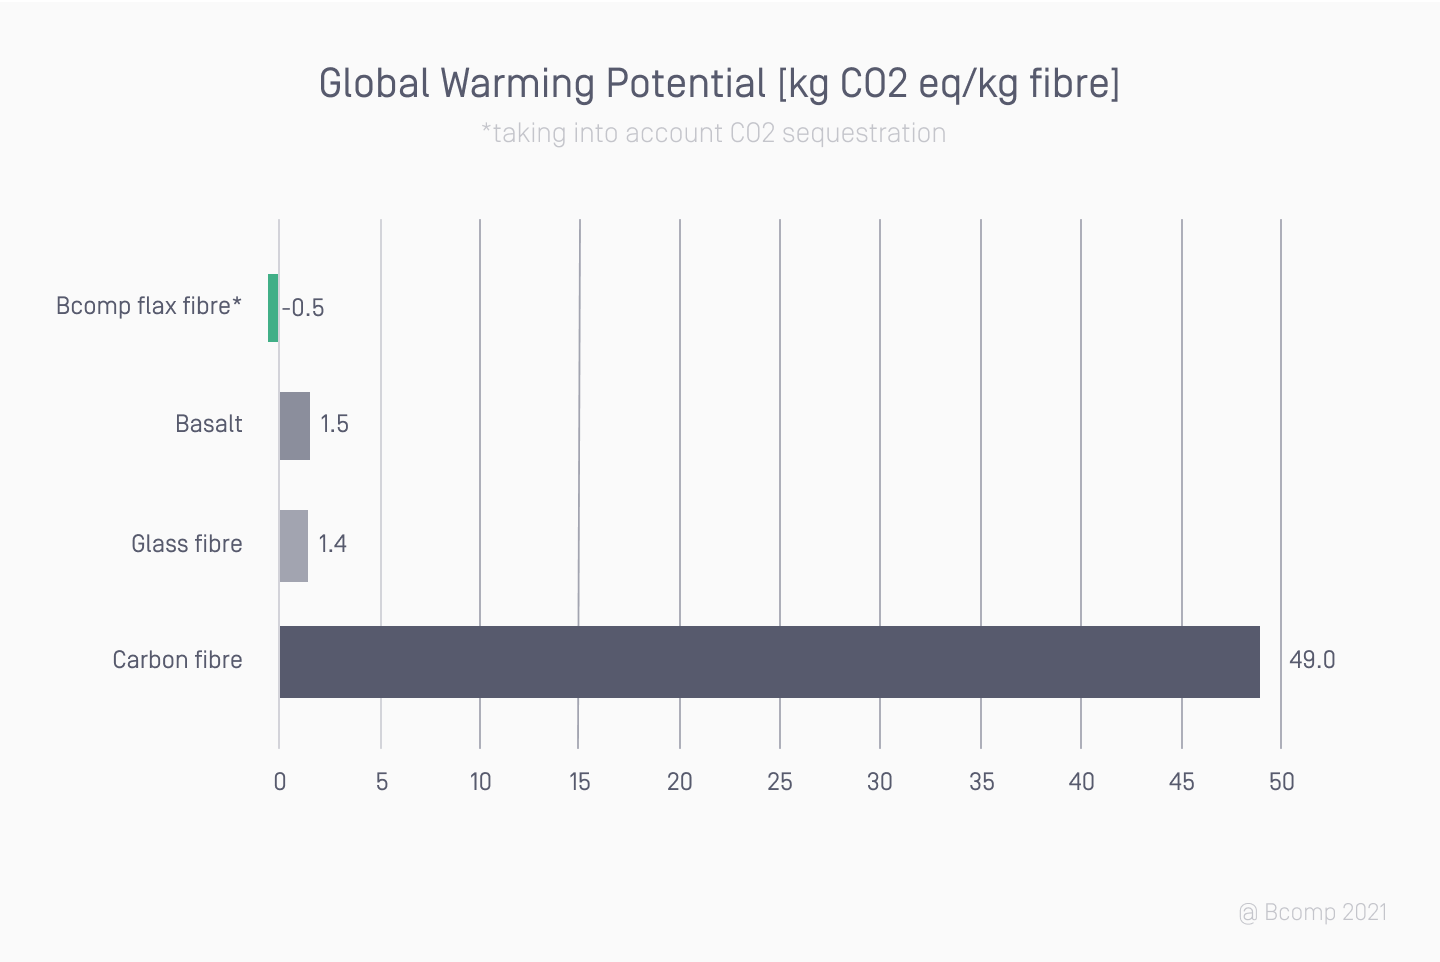 The image is a graph showing the global warming potential in Kg Co2 eq/kg fibre of Bcomp's flax fibre, Basalt, Glass fibre, and carbon fibre which has by far the highest impact.